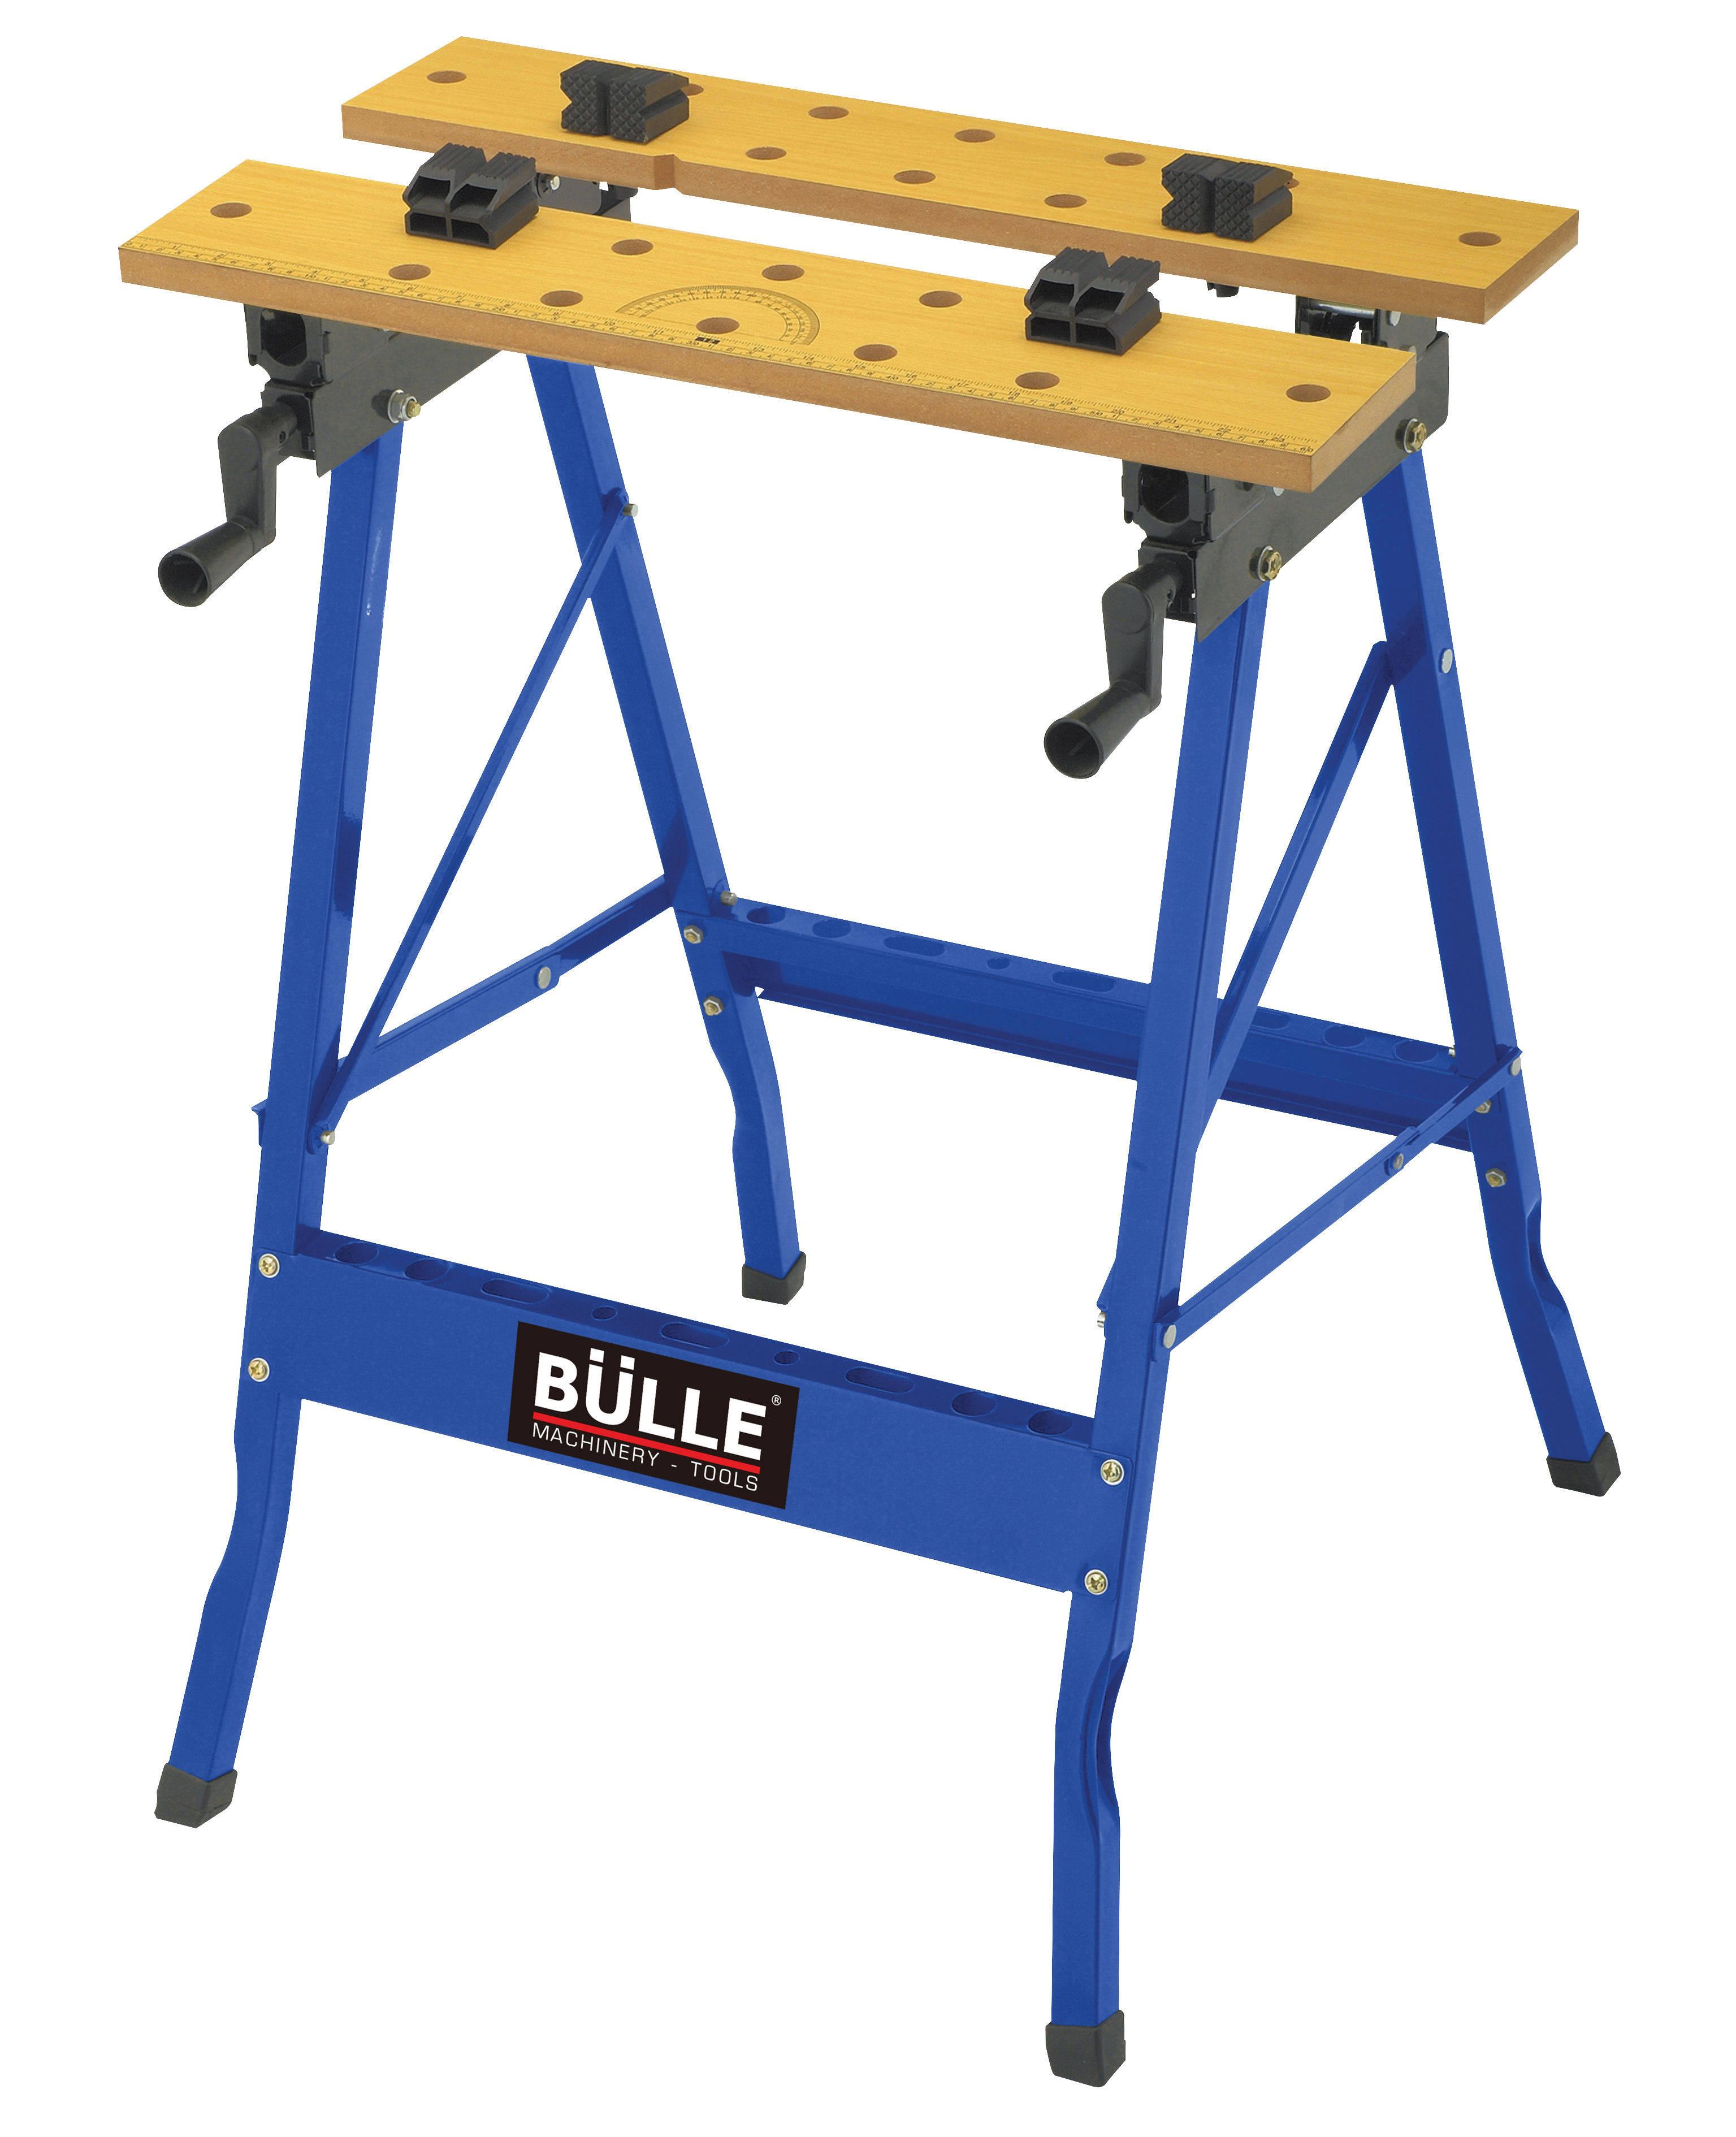 Workbench with Wood (MDF) Table Bulle - 3